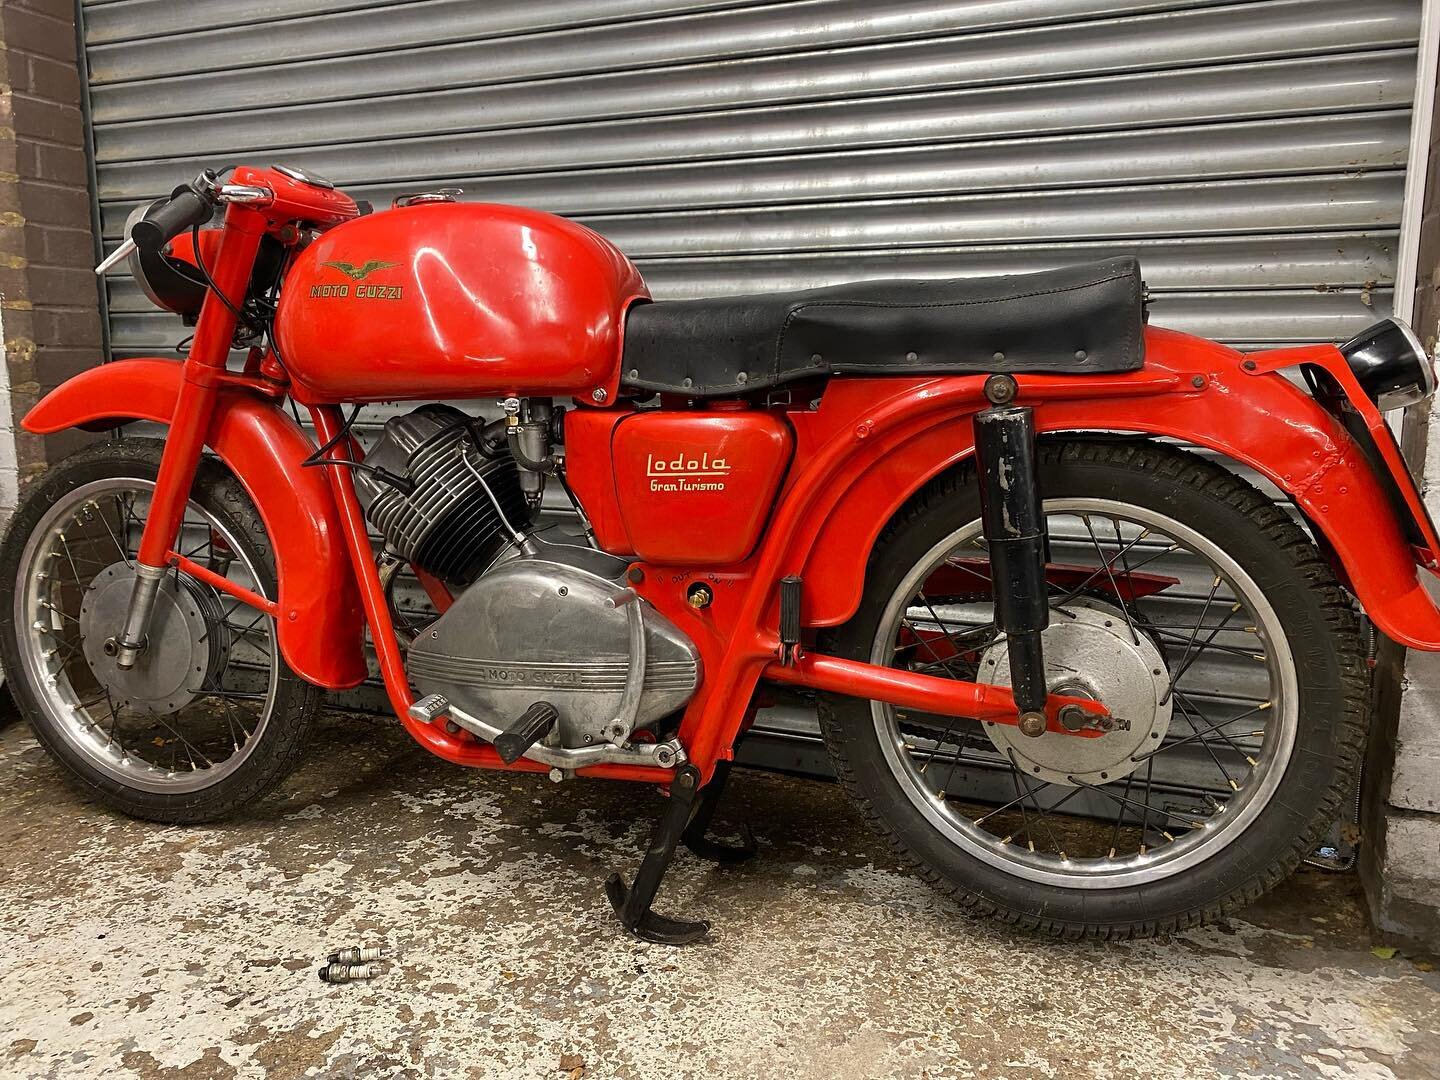 This beautiful Moto Guzzi Ladola GT is leaving us this week after a little engine work and fettling. A wonderful looking motorcycle, a real head turner and nice to have some good Italian styling in the workshop!! #motoguzzi #motoguzziladola #reditali